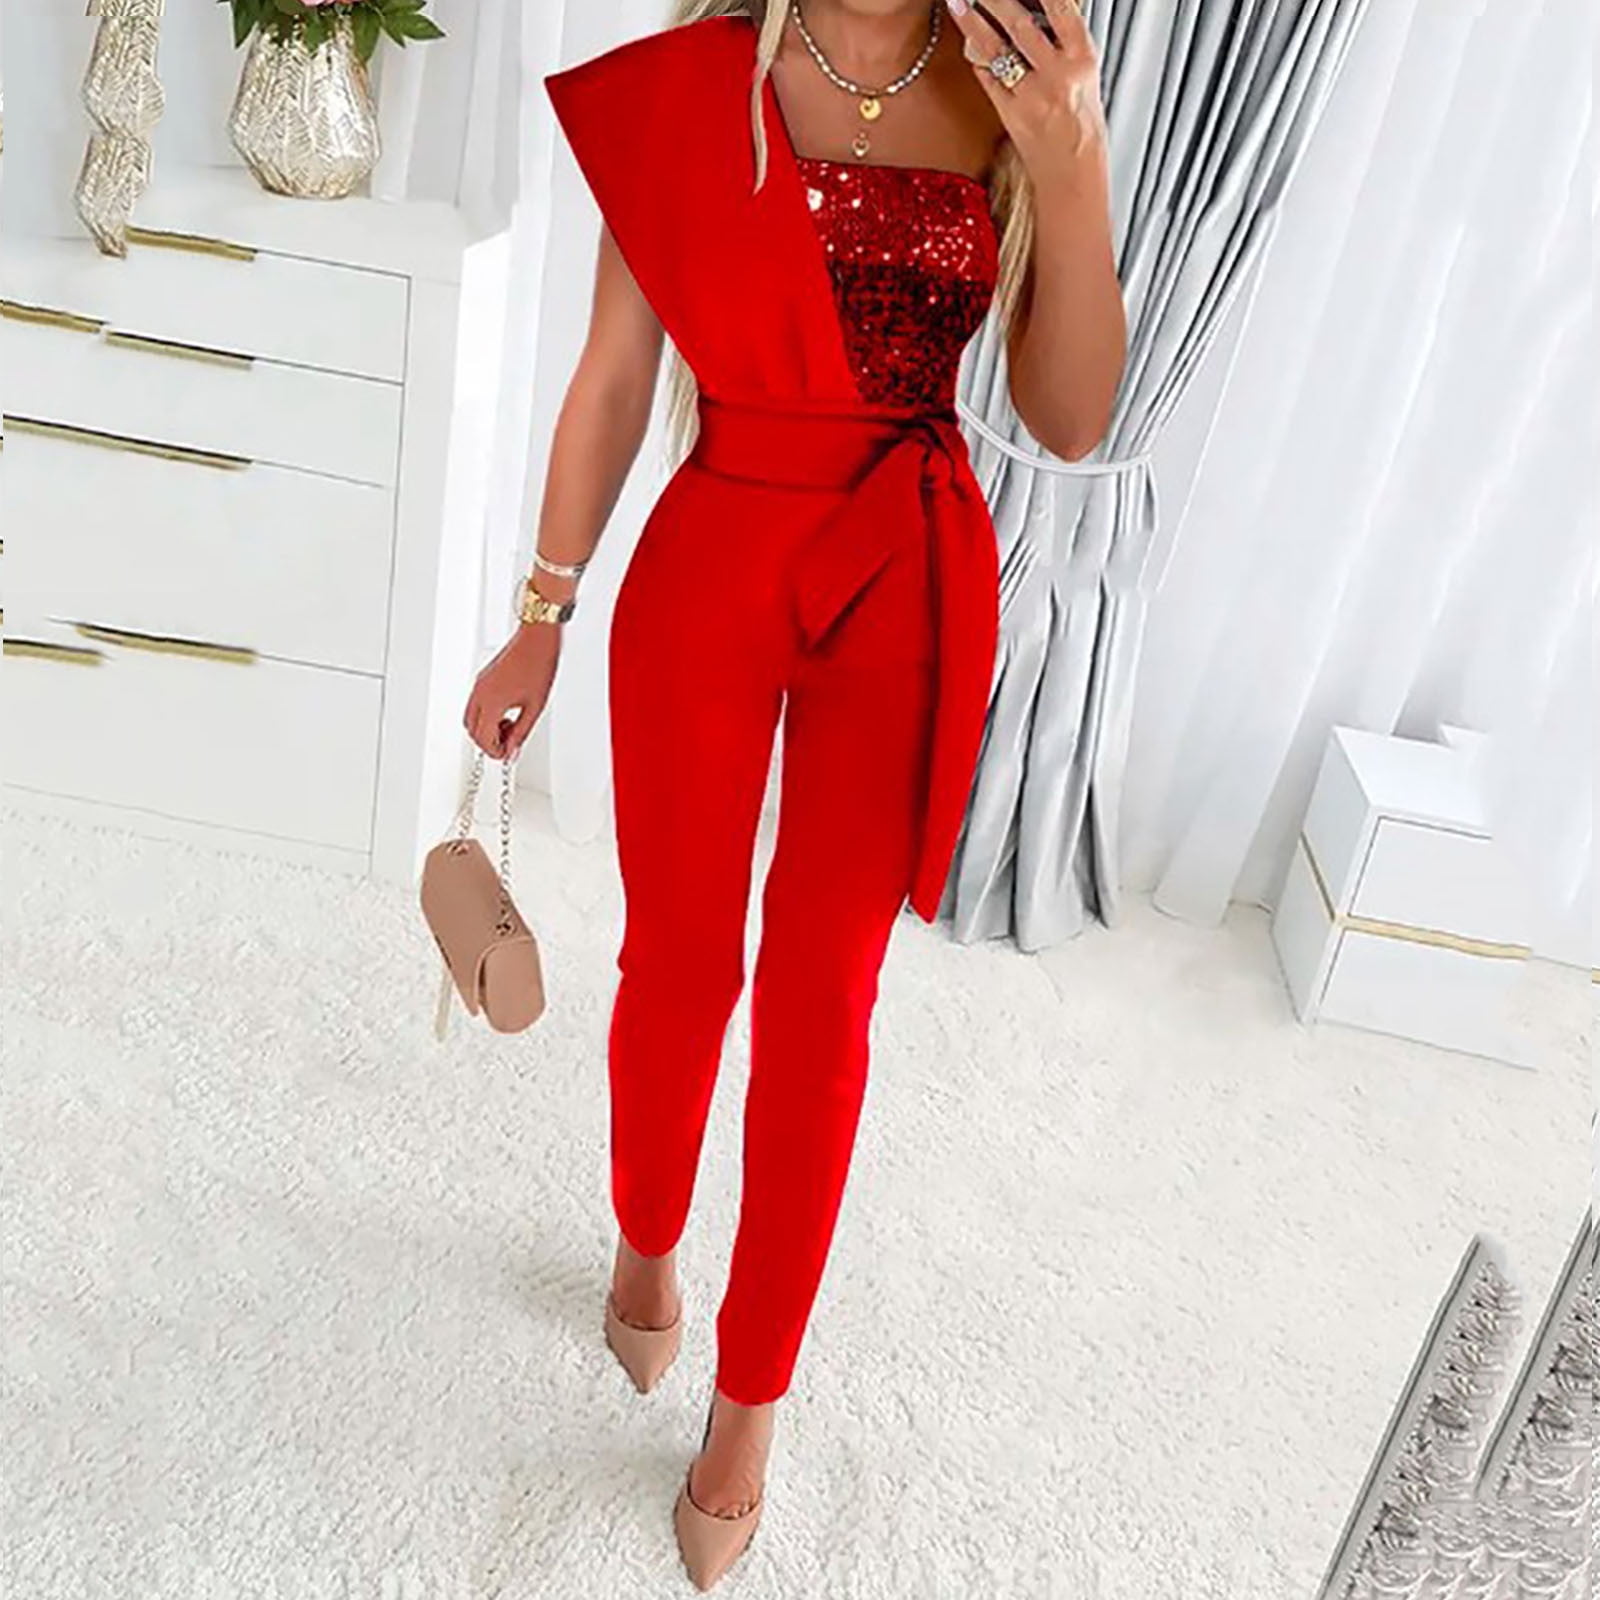 Aueoeo Red Jumpsuits for Women, Womens Summer Sequins Sleeveless